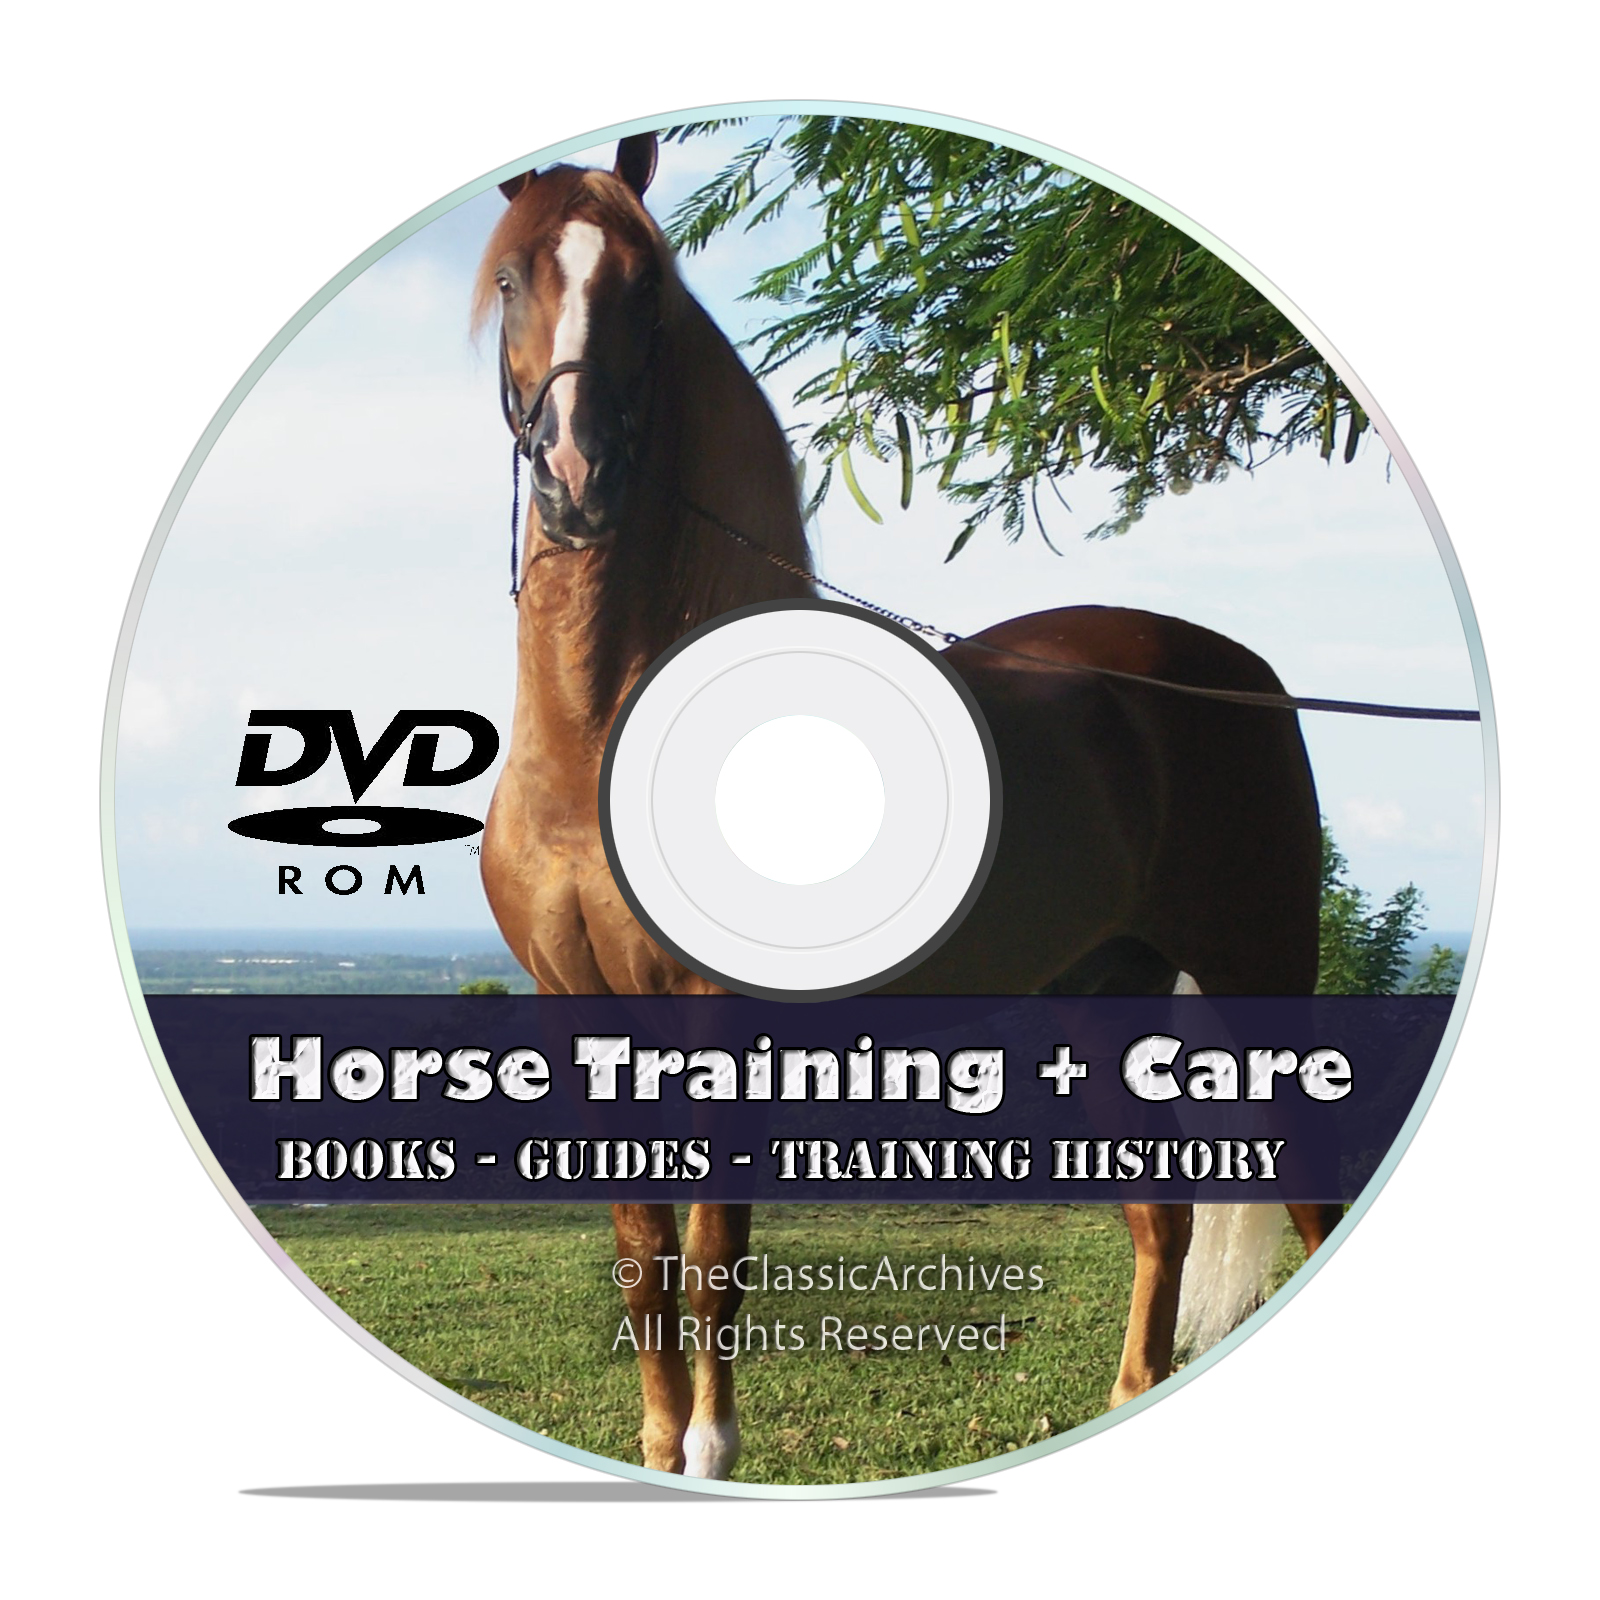 Classic How To Do Horse Training Taming Library, Make a Harness Guides DVD